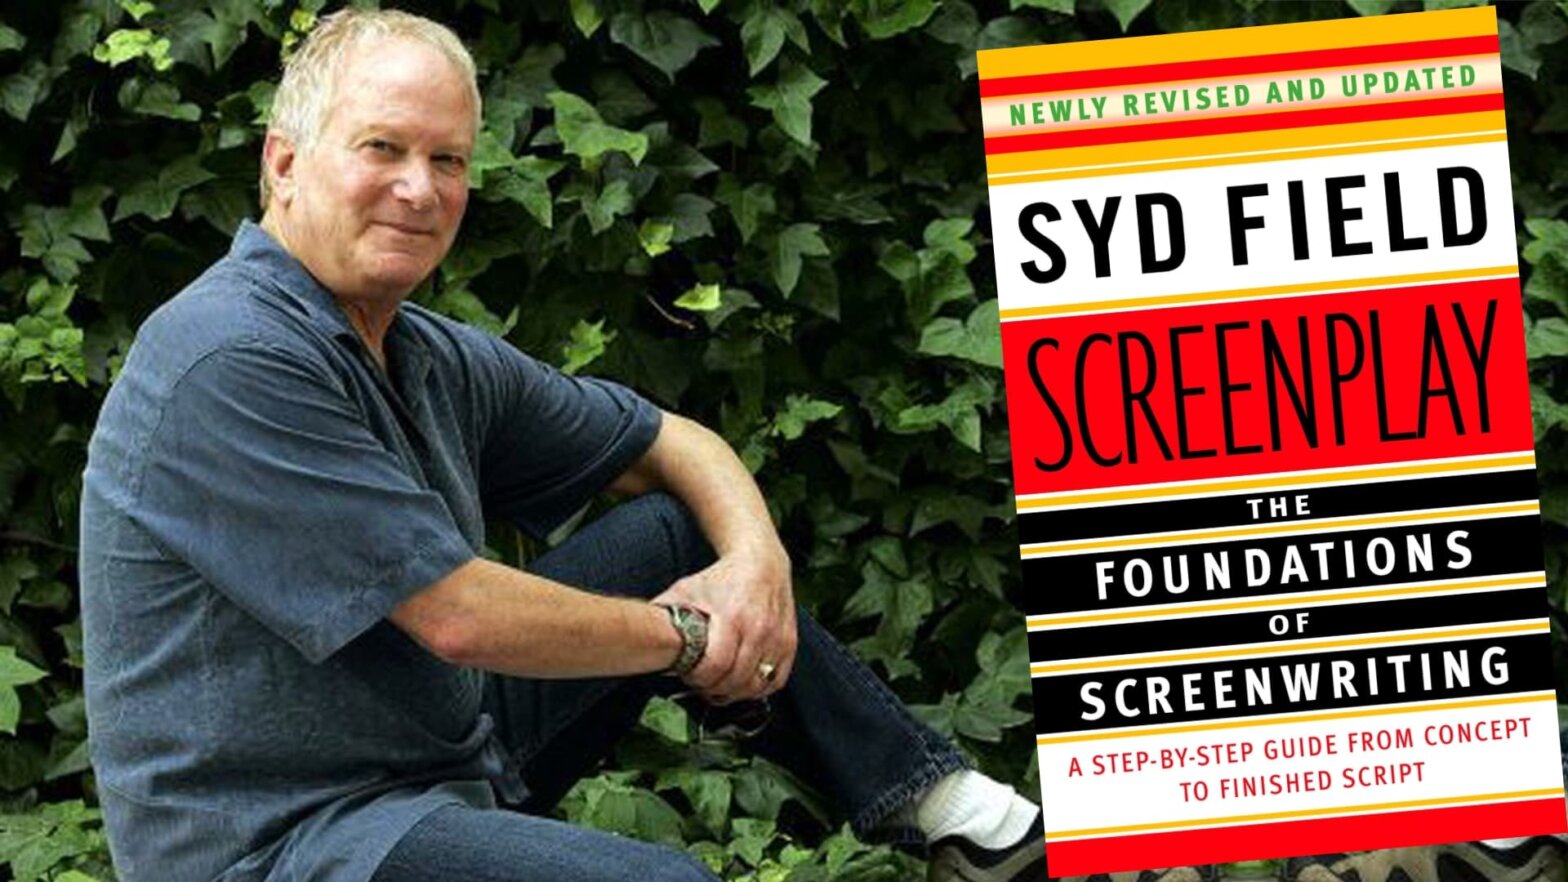 Who is Syd Field — Biography Work of a Screenwriting Legend Featured